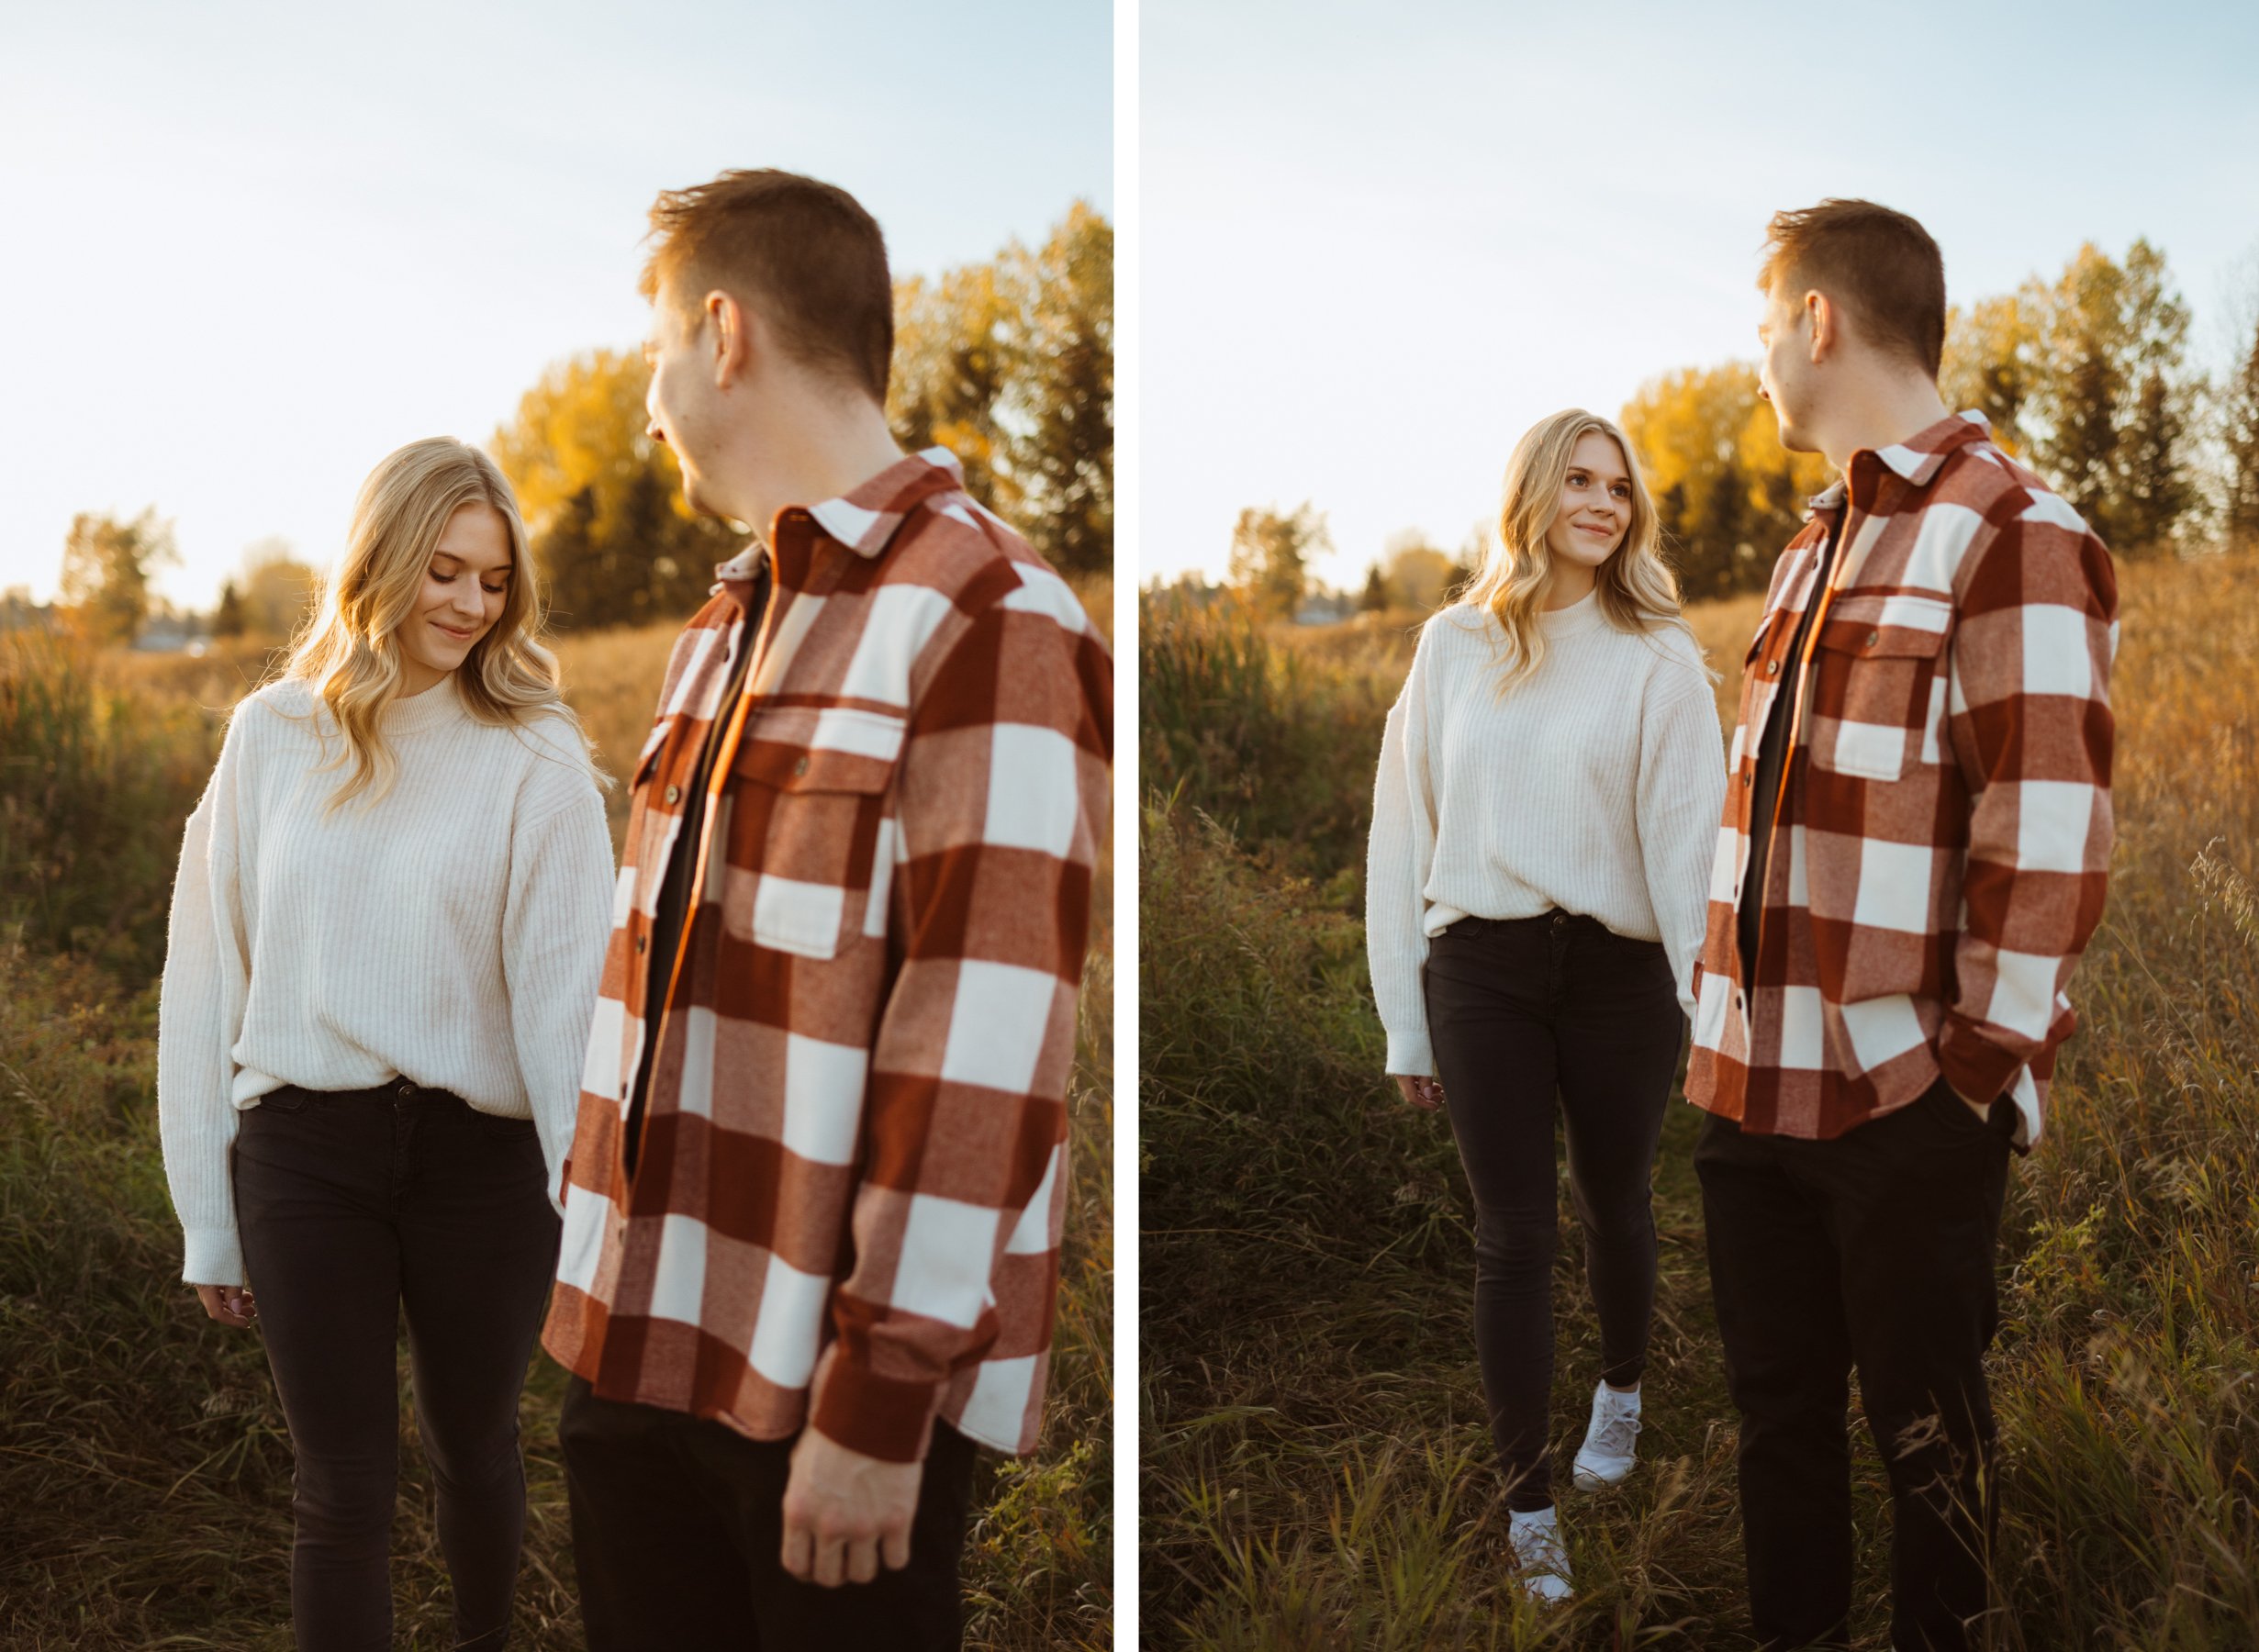 Calgary-wedding-photographer-love-and-be-loved-photography-Matthew-Kyra-Fish-Creek-Park-Fall-Engagement-Session-3.jpg